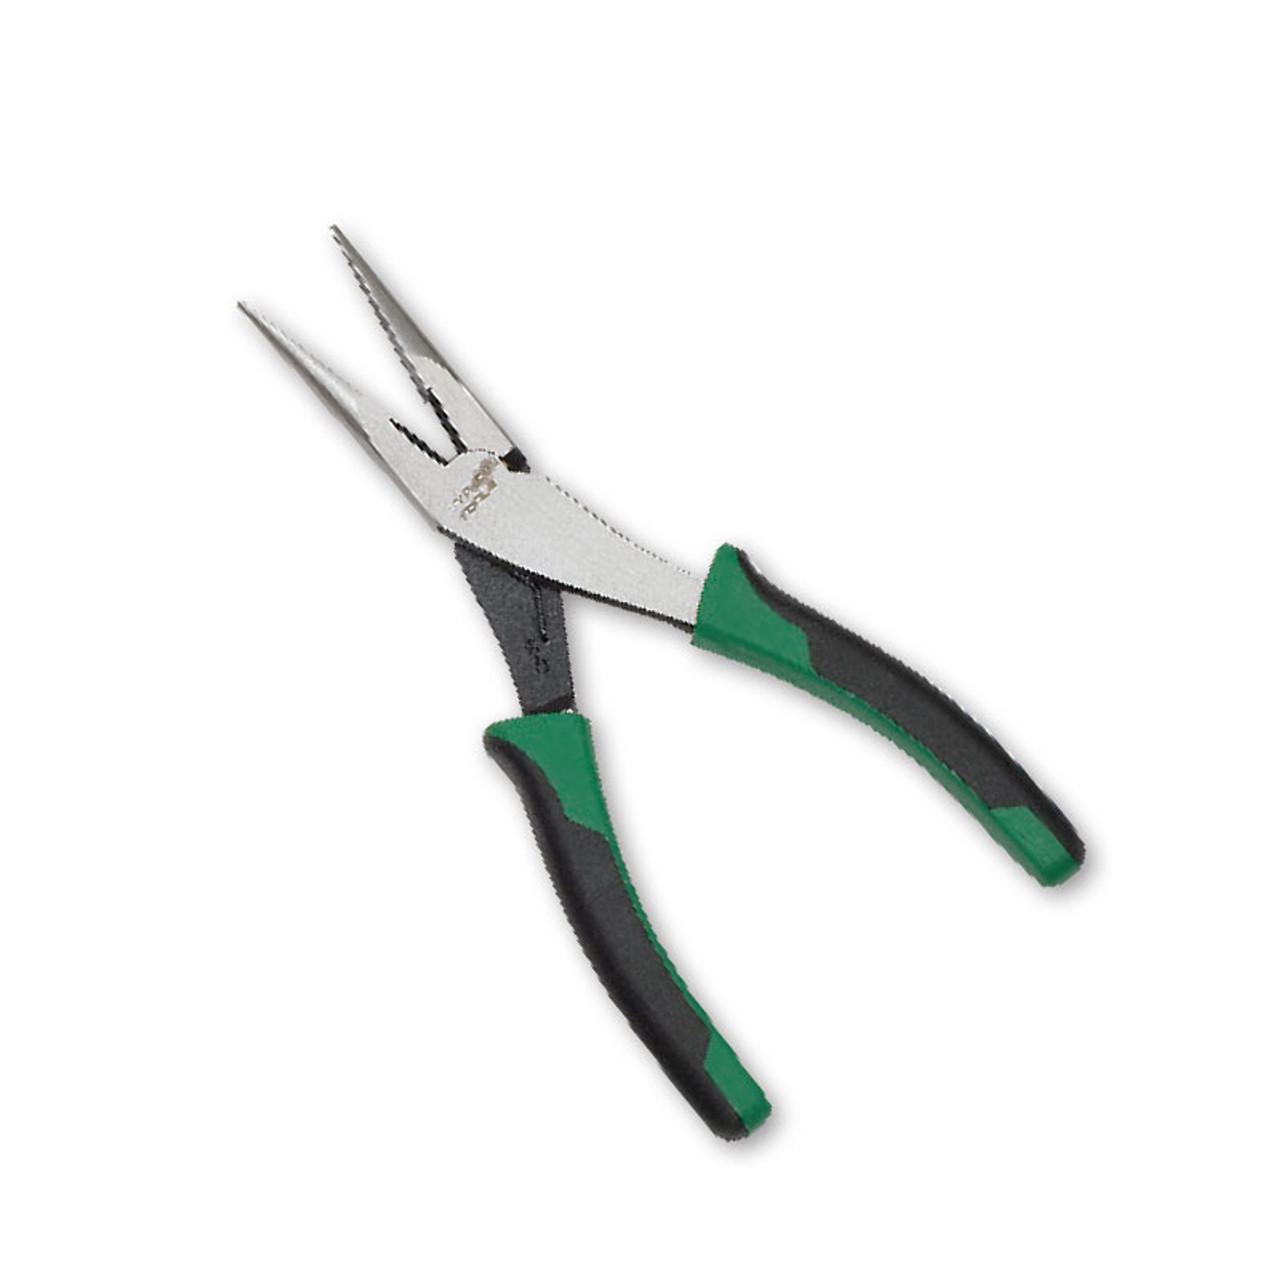 Pliers - Longnose Insulated Handle 8"